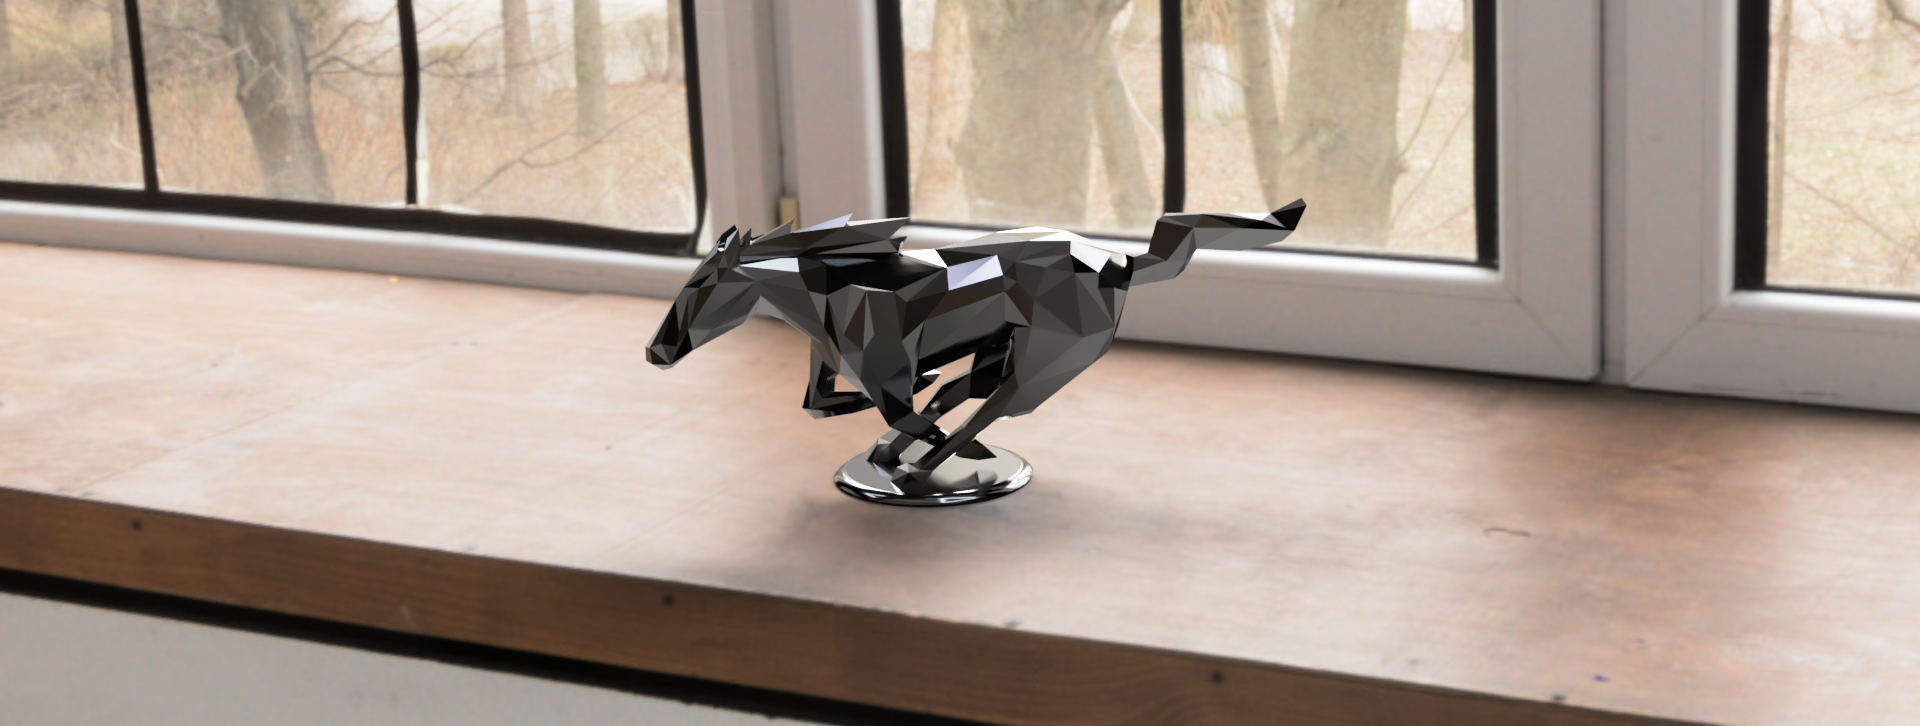 S650 Mustang Ford Mustang Running Pony Desk Sculpture c5f92a71-70c5-4298-ab13-531c6618c010.PNG